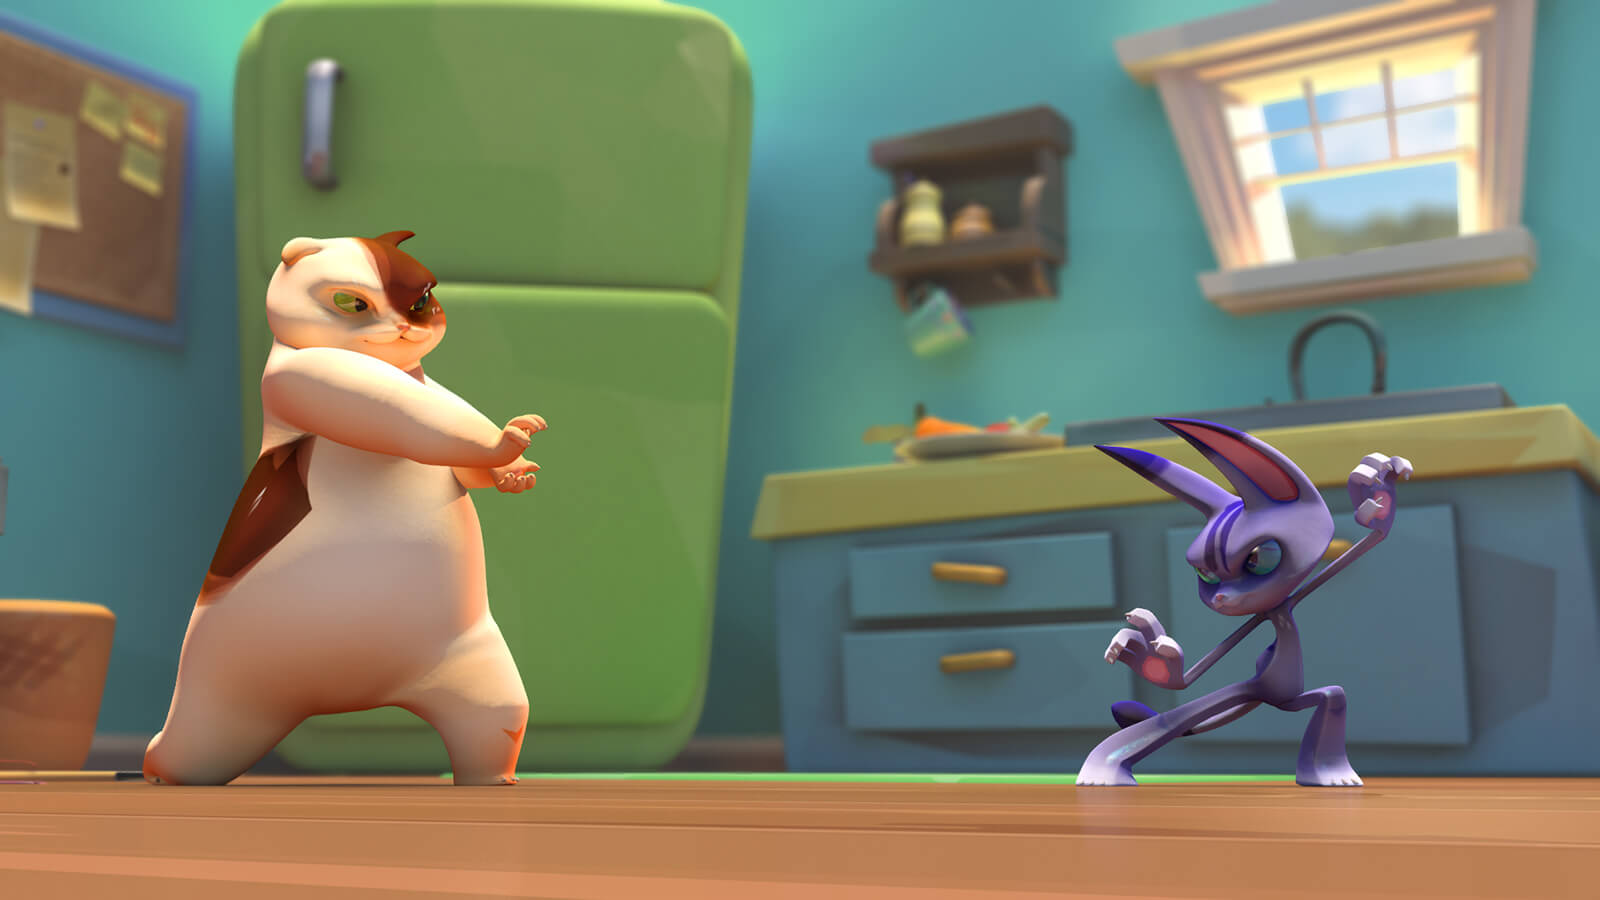 A fat, brown-and-white cat and a small purple cat face off in fighting stances against a colorful kitchen backdrop.